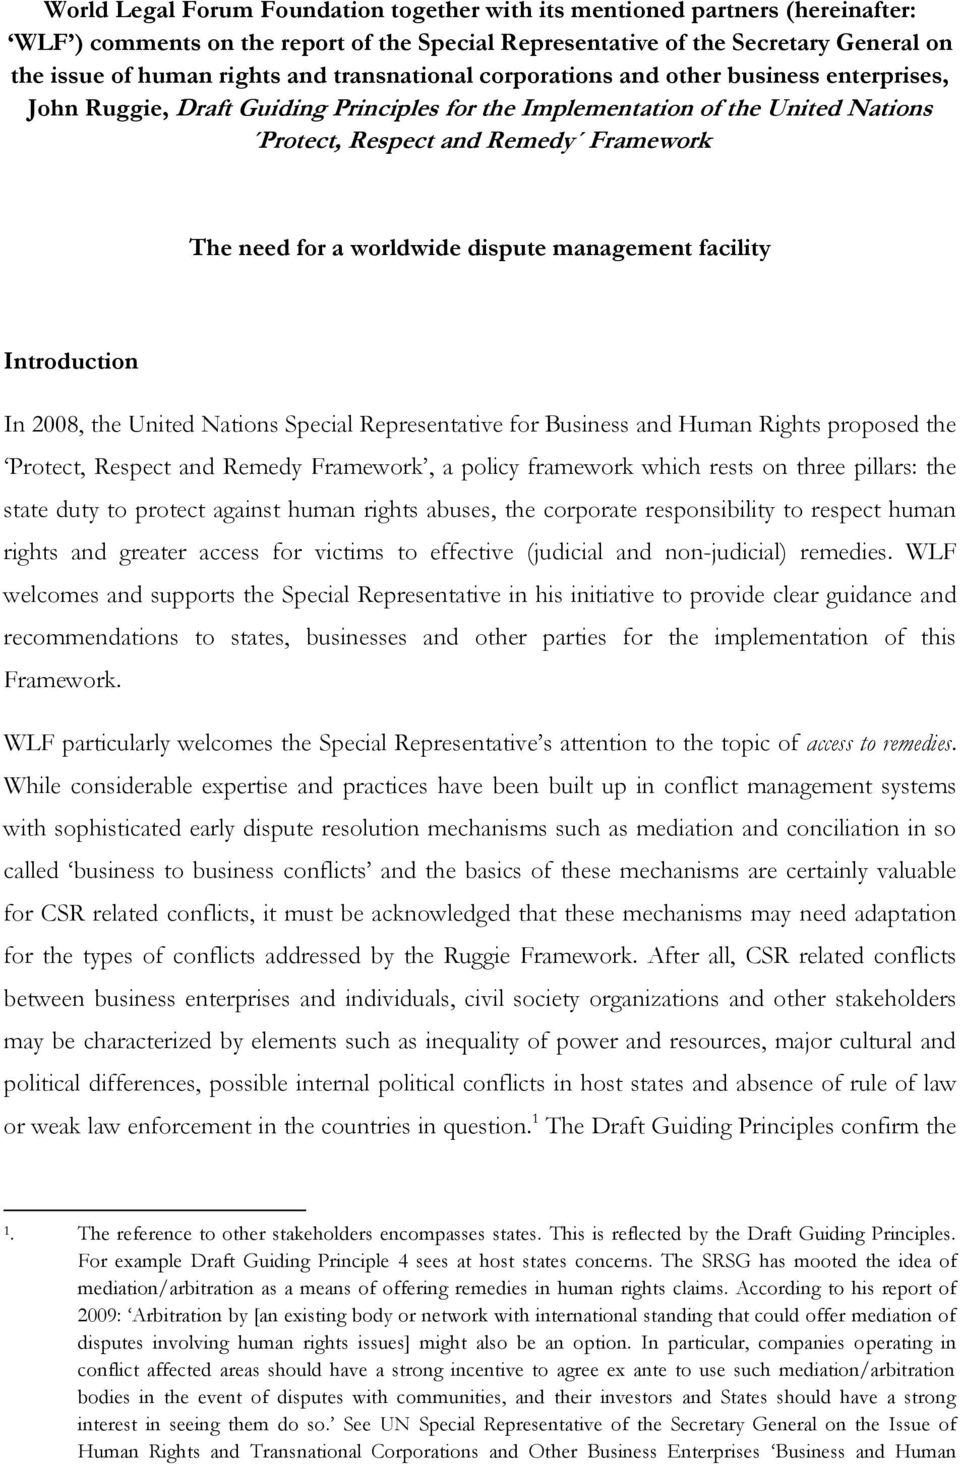 worldwide dispute management facility Introduction In 2008, the United Nations Special Representative for Business and Human Rights proposed the Protect, Respect and Remedy Framework, a policy